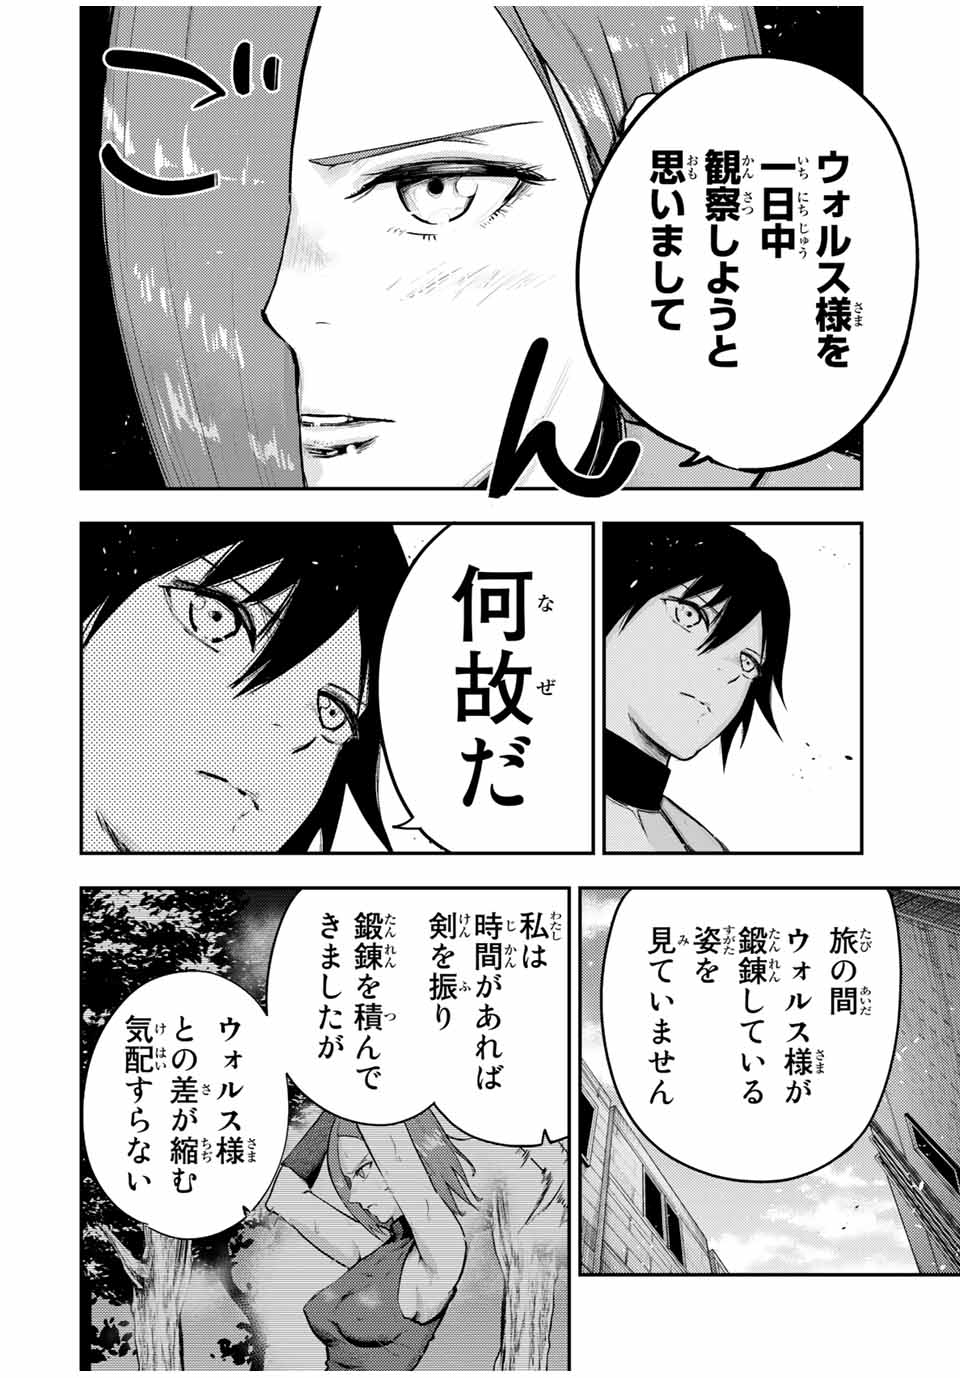 the strongest former prince-; 奴隷転生 ～その奴隷、最強の元王子につき～ 第32話 - Page 16